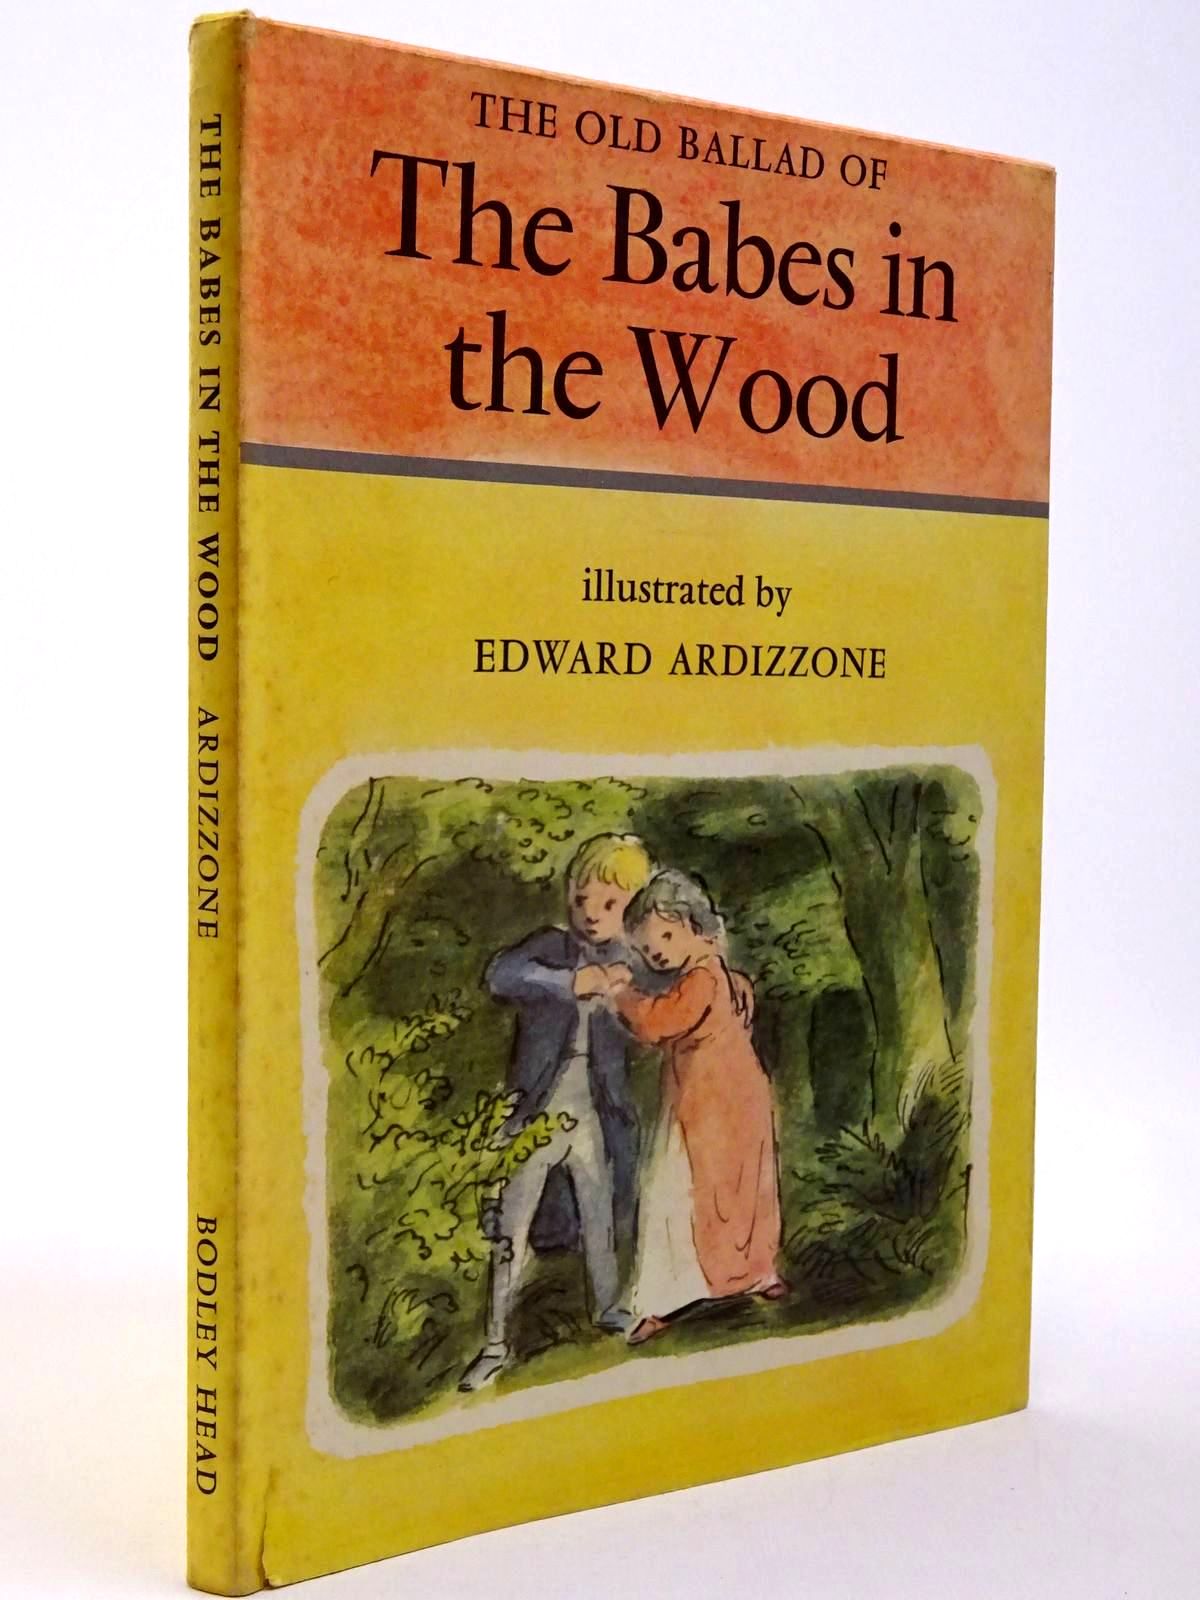 Photo of THE OLD BALLAD OF THE BABES IN THE WOOD written by Lines, Kathleen illustrated by Ardizzone, Edward published by The Bodley Head (STOCK CODE: 2130149)  for sale by Stella & Rose's Books